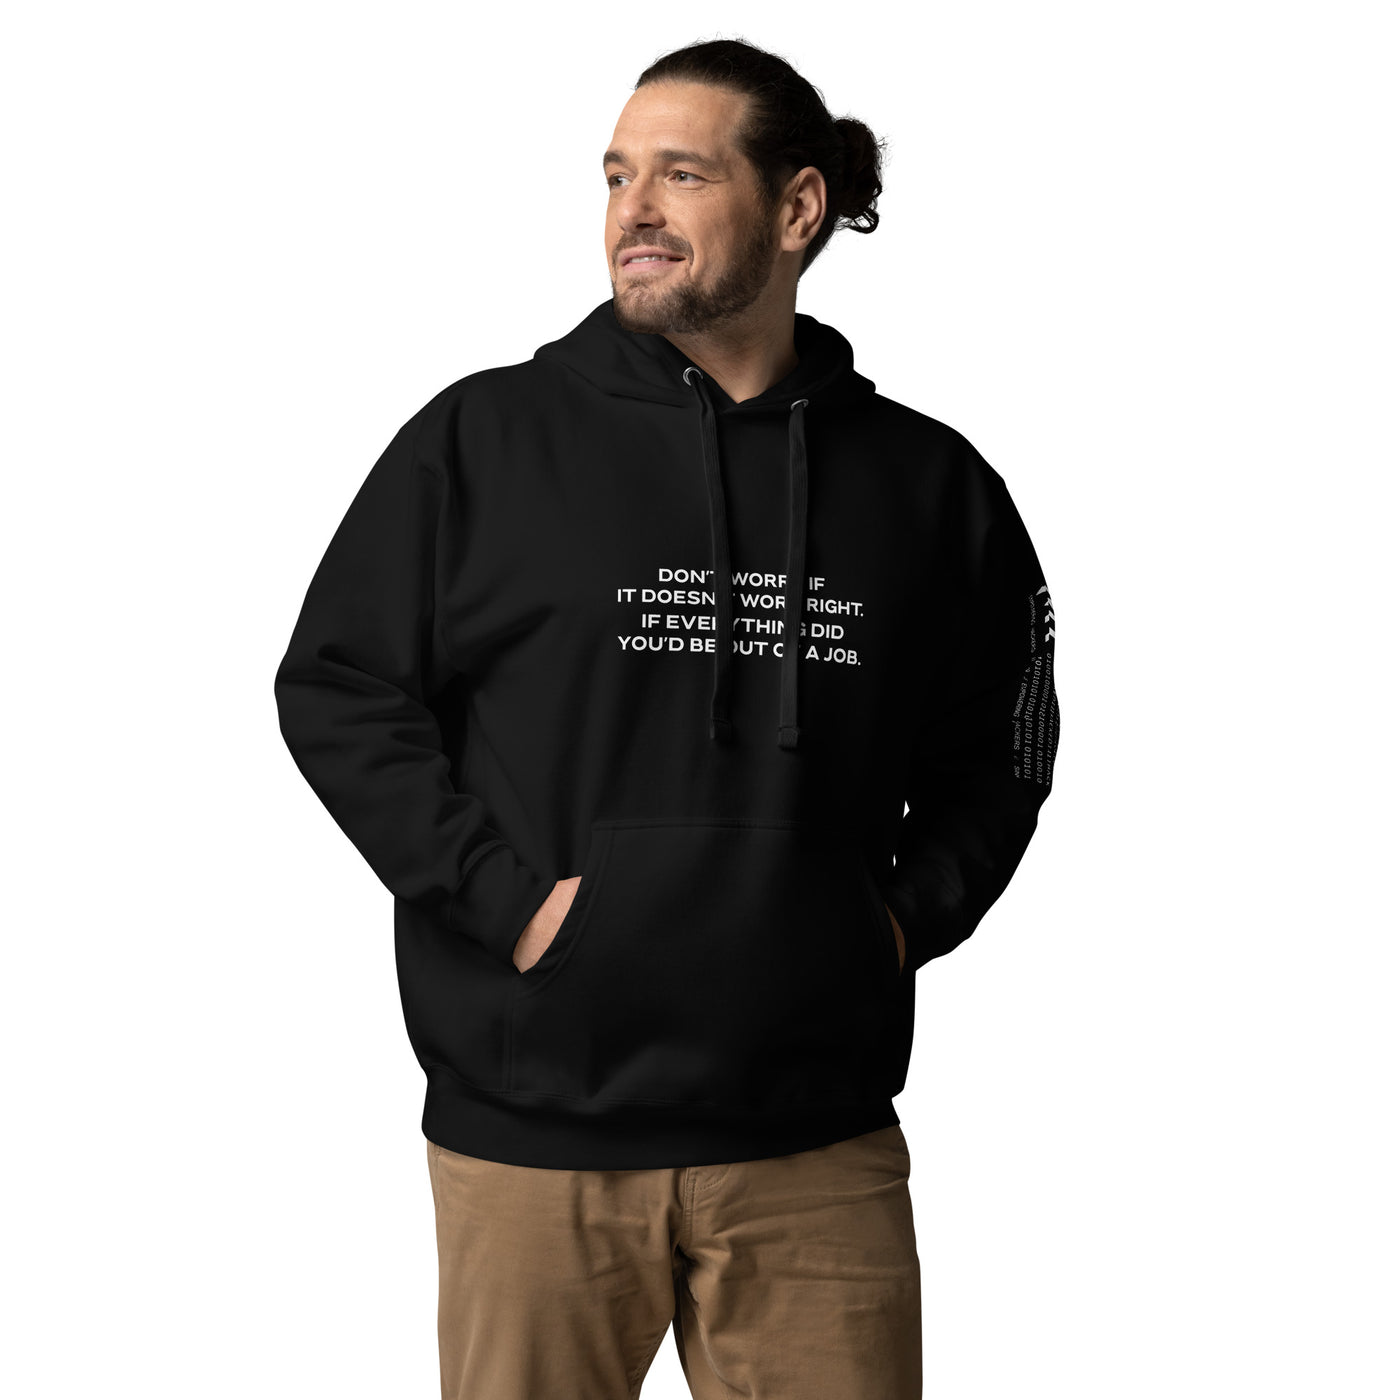 Don't worry if it doesn't work right: if everything did, you would be out of your job - Unisex Hoodie